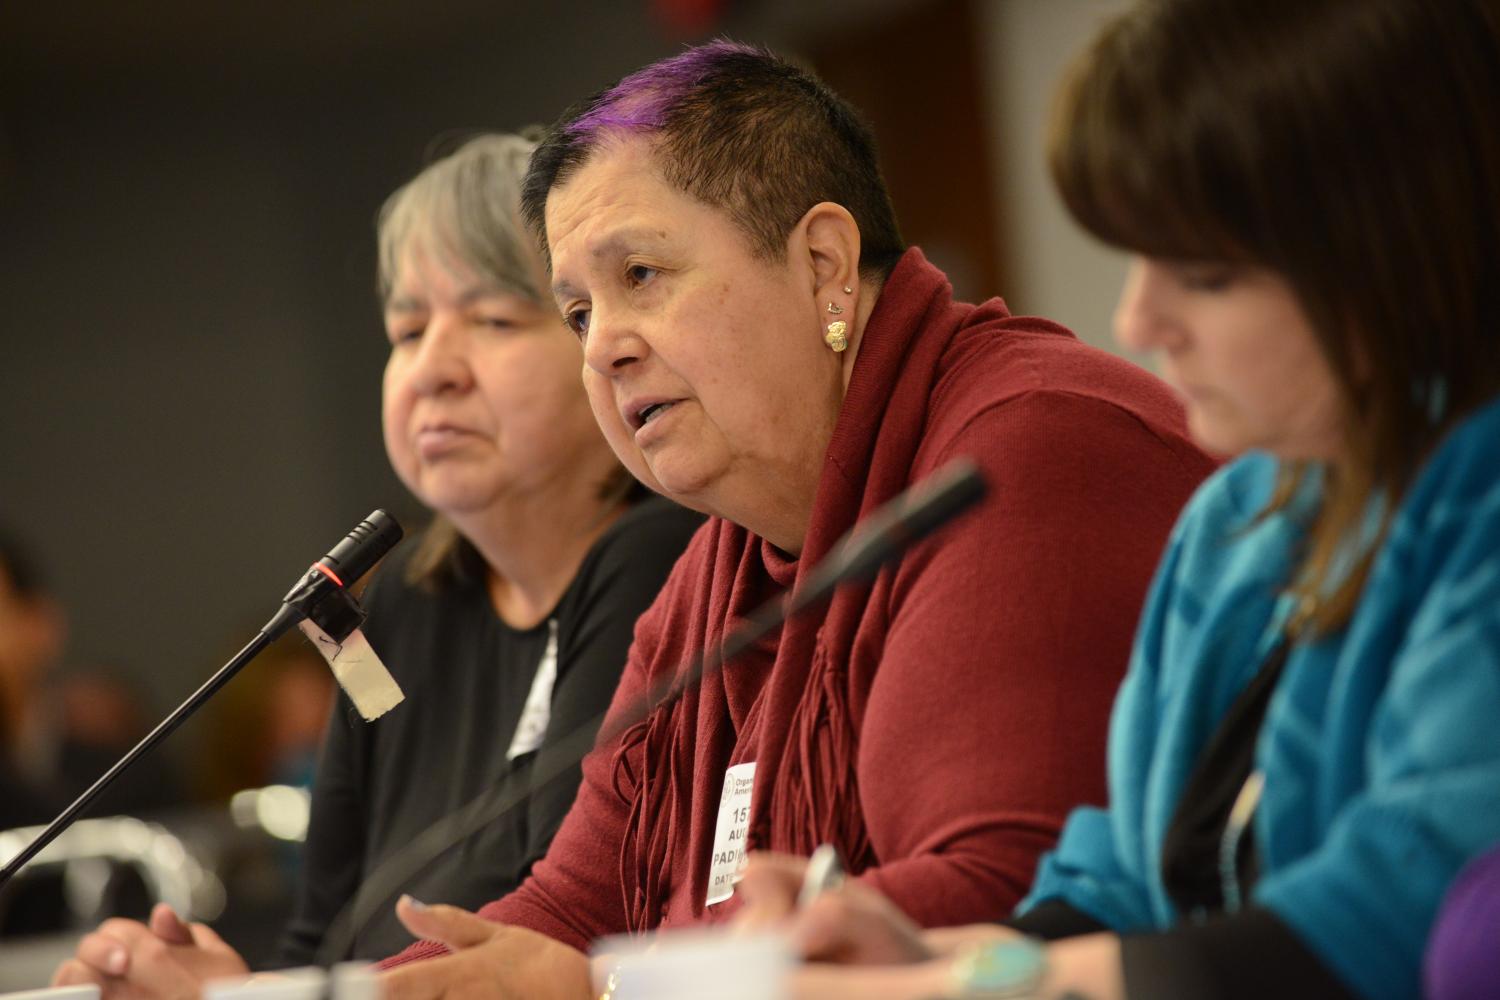 Sharon McIvor talking at the microphone during a hearing about missing and murdered Indigenous women in British Columbia, held by the Inter-American Commission on Human Rights.